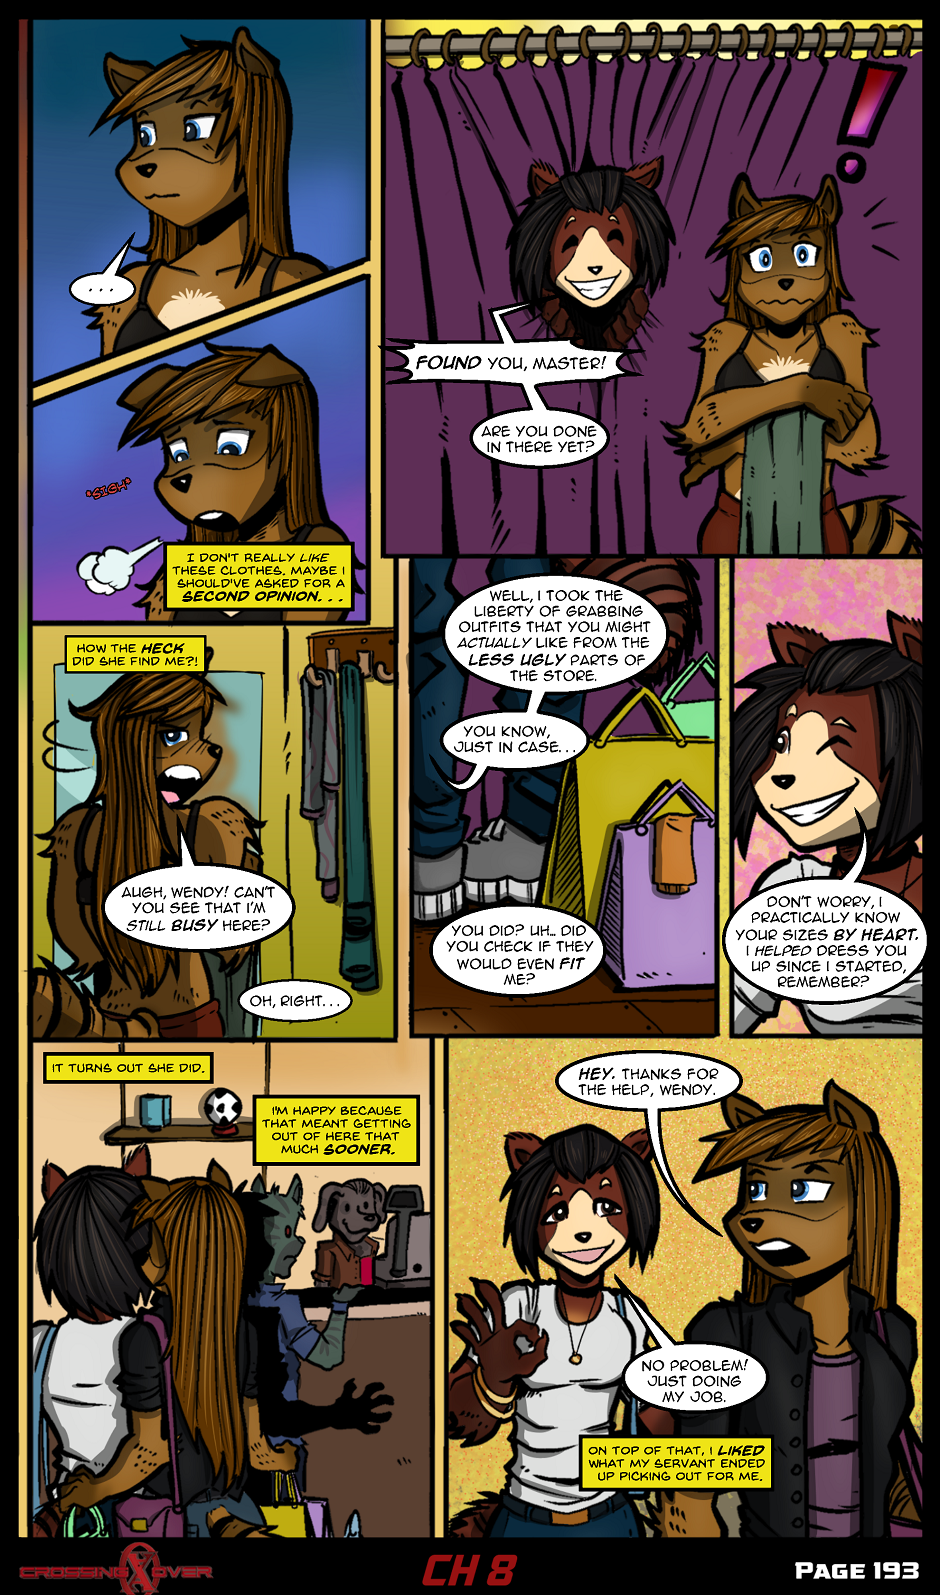 Page 193 (Ch 8)